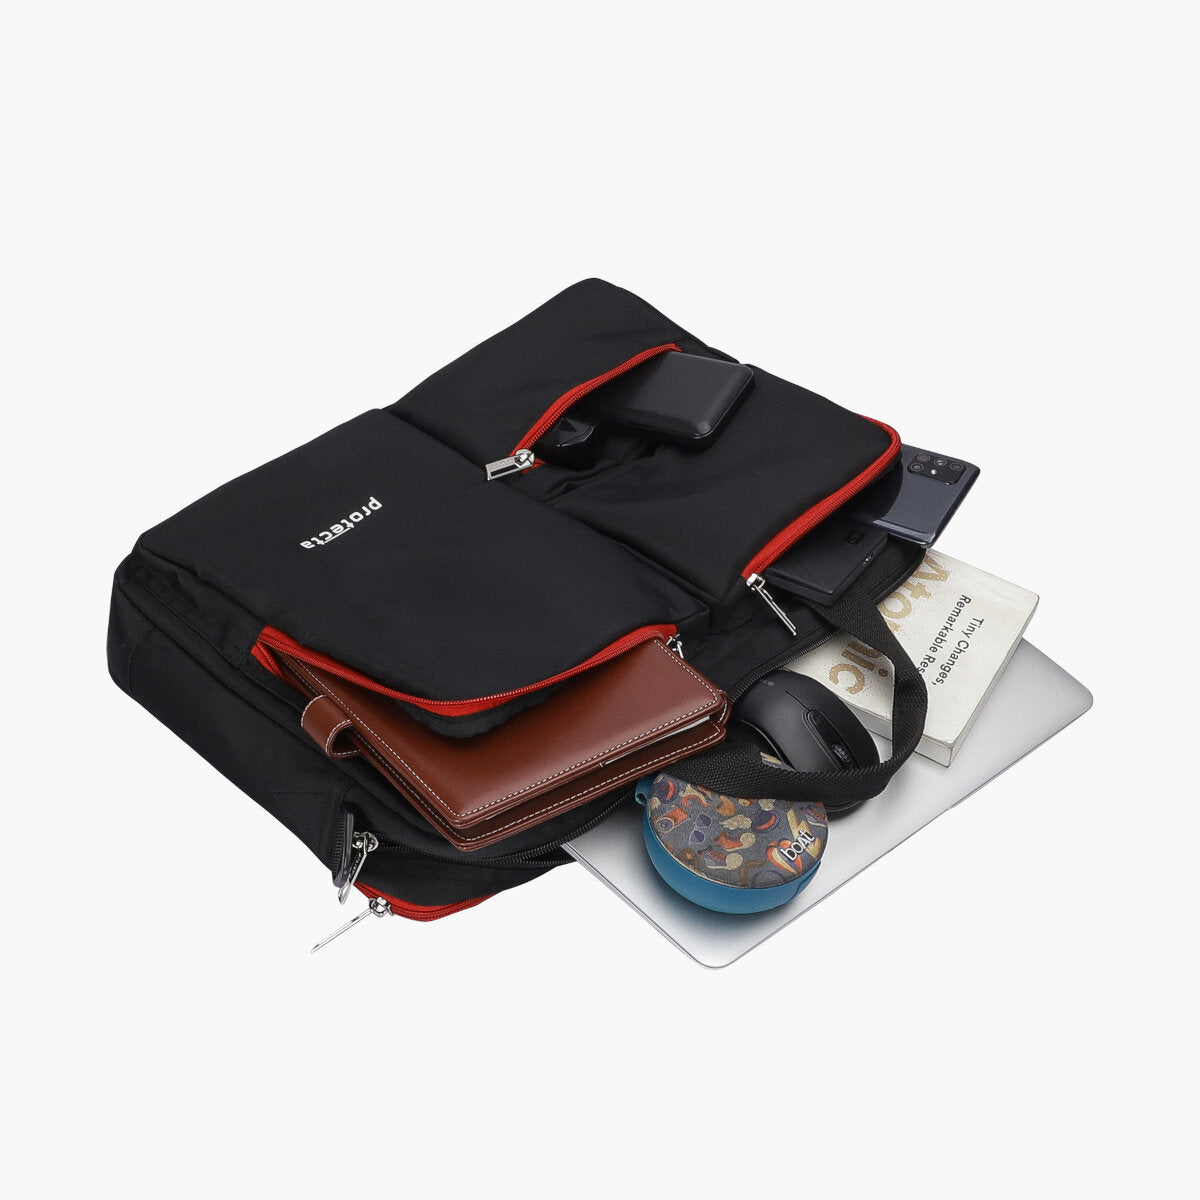 Black Red | Protecta Organised Chaos 2.0 Office Laptop Bag - 1